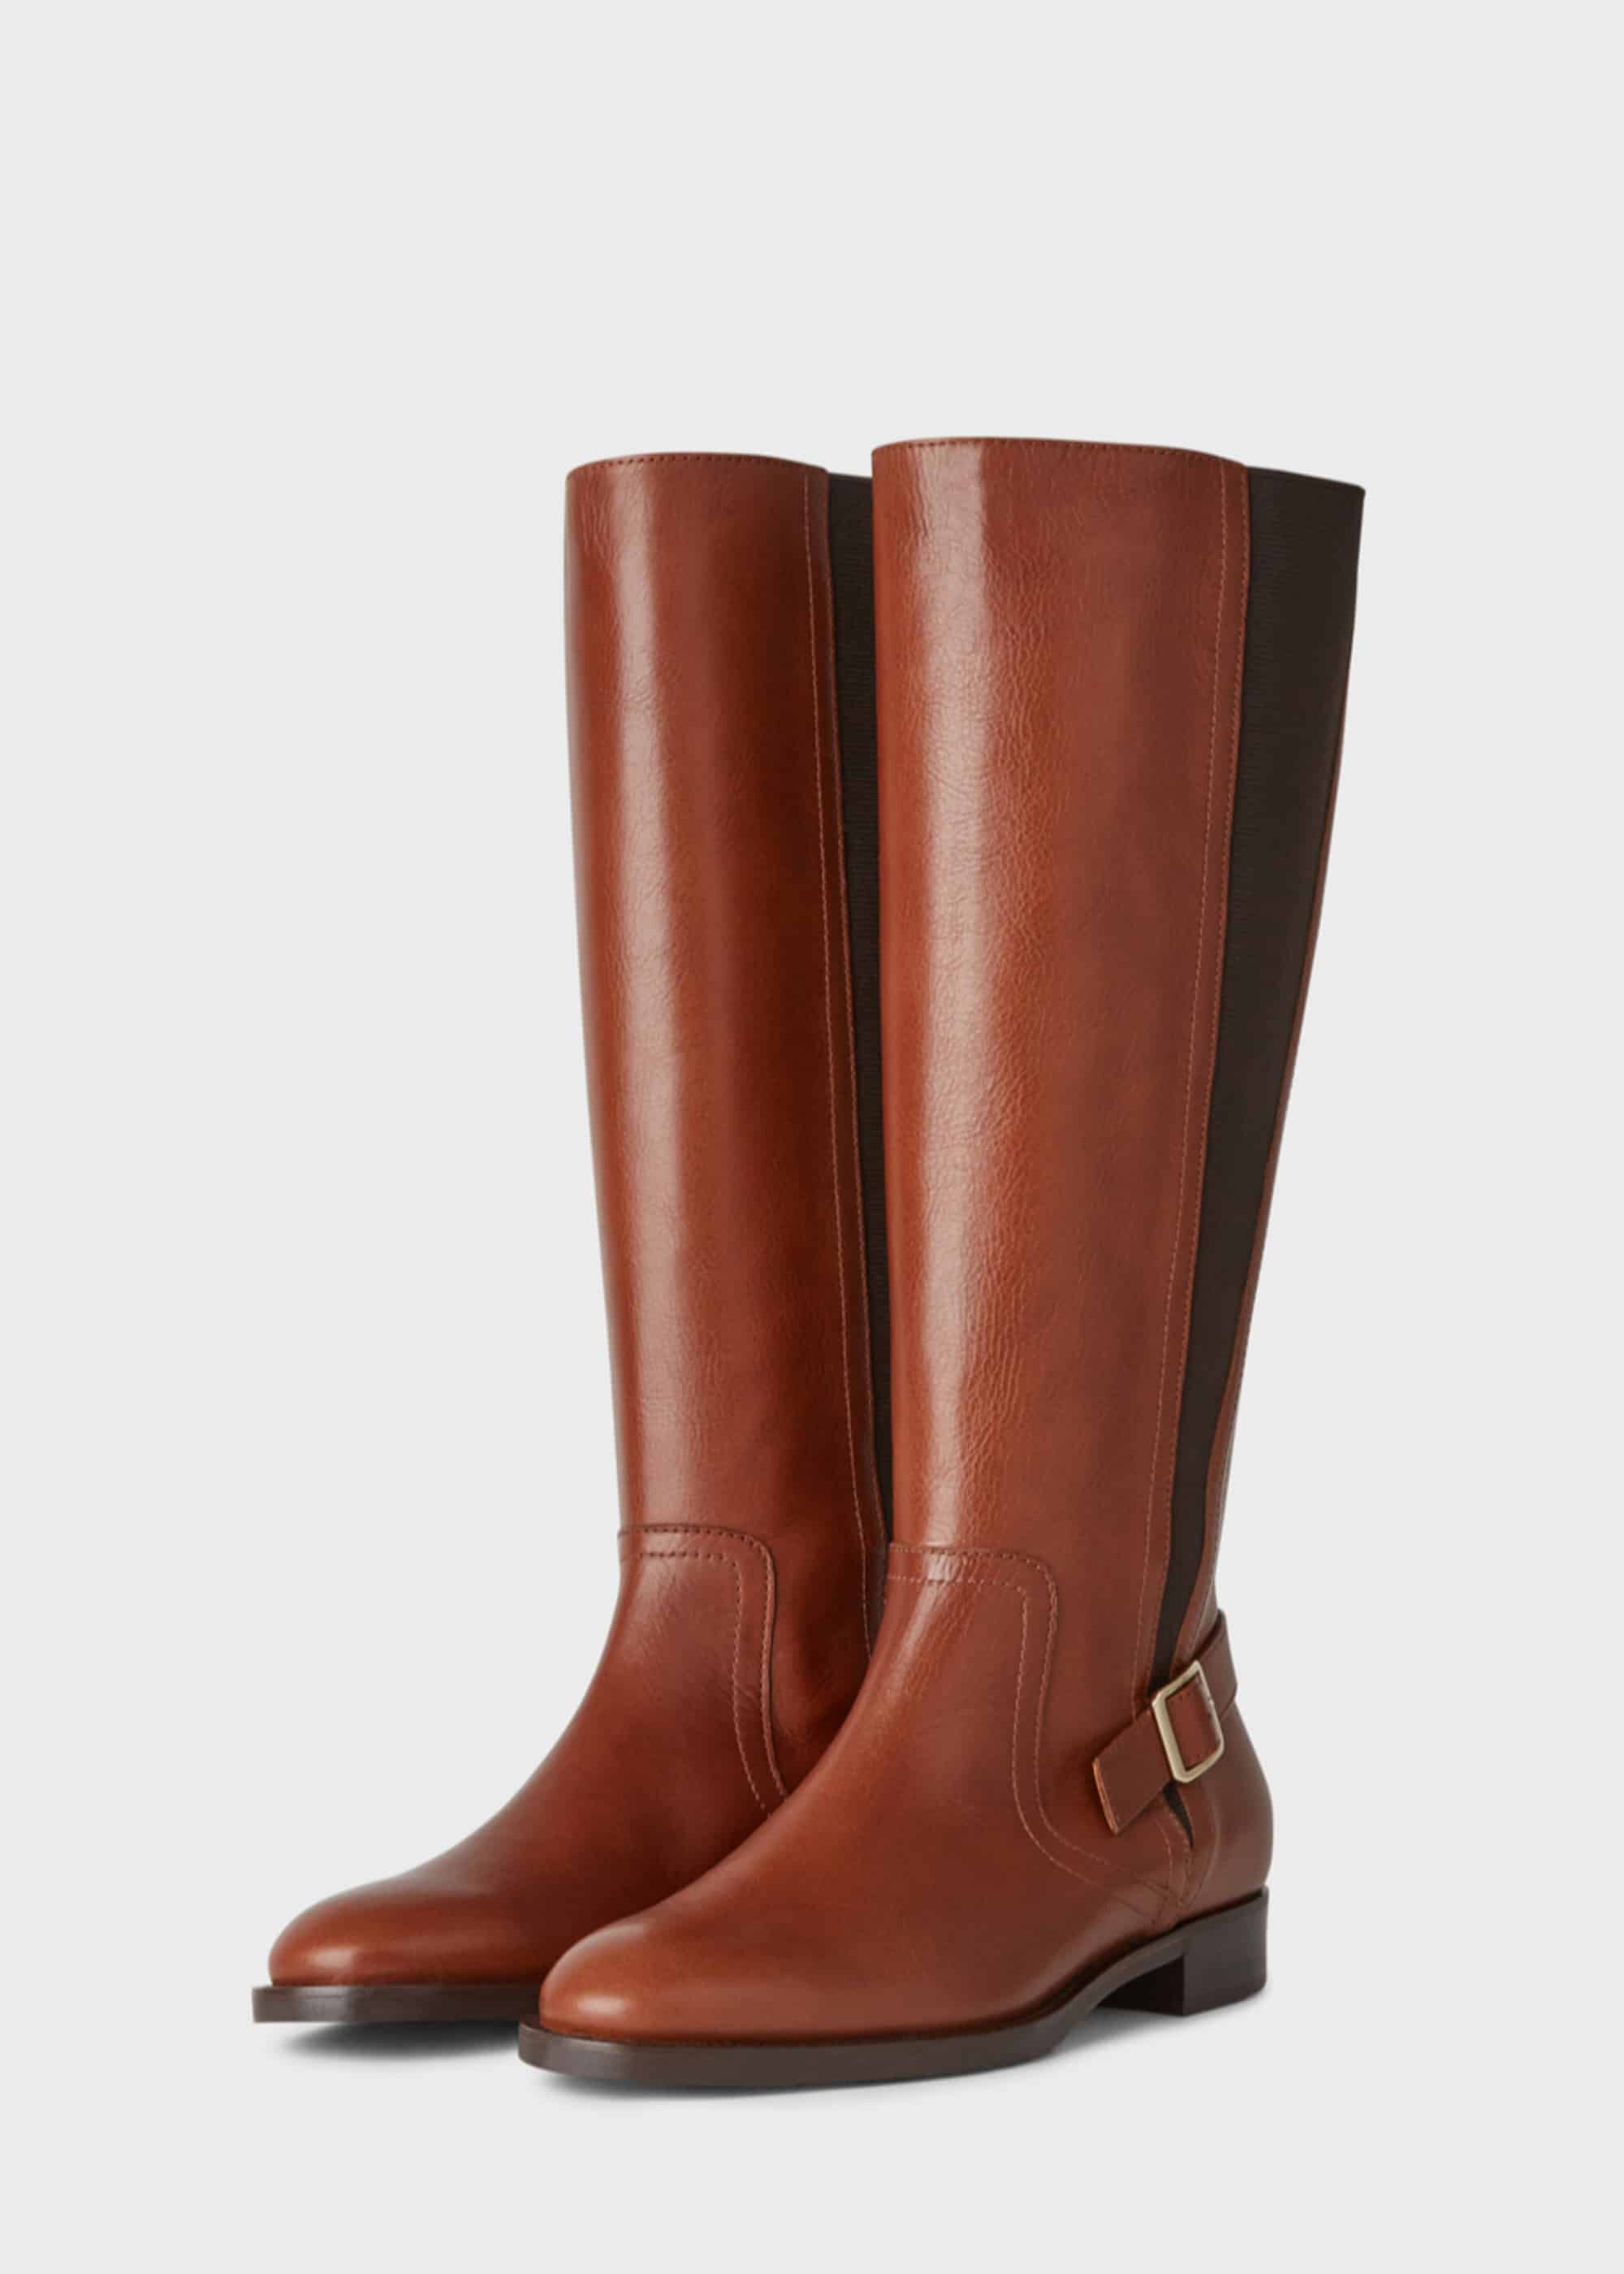 Shop Hobbs Boots on sale at the Marie 